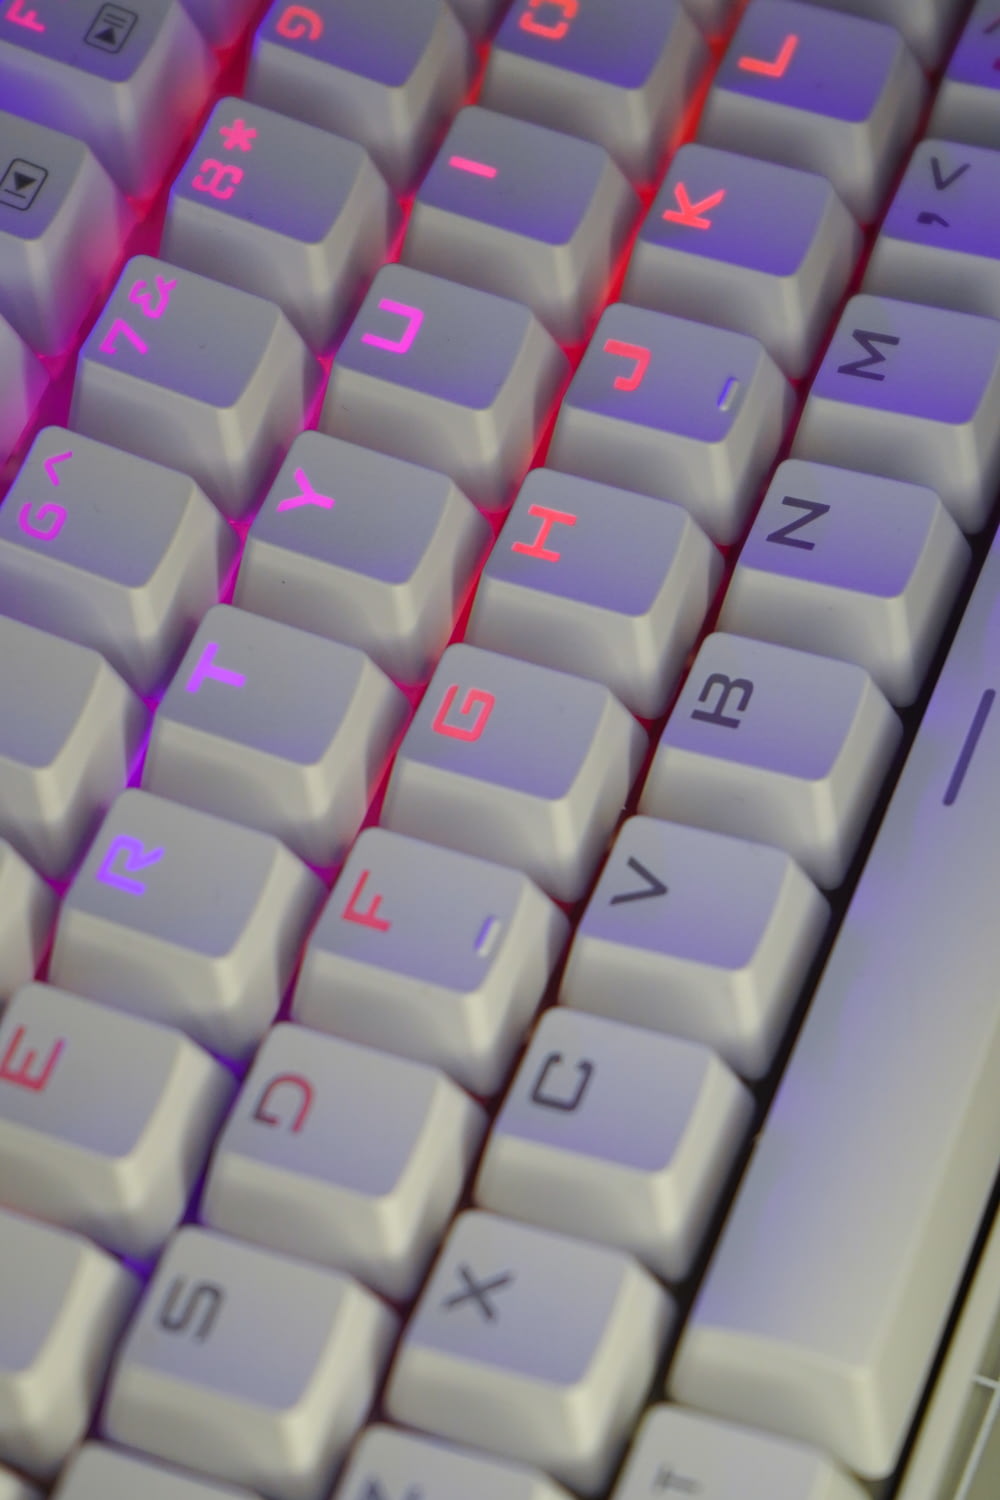 a close up of a keyboard with a red light on it